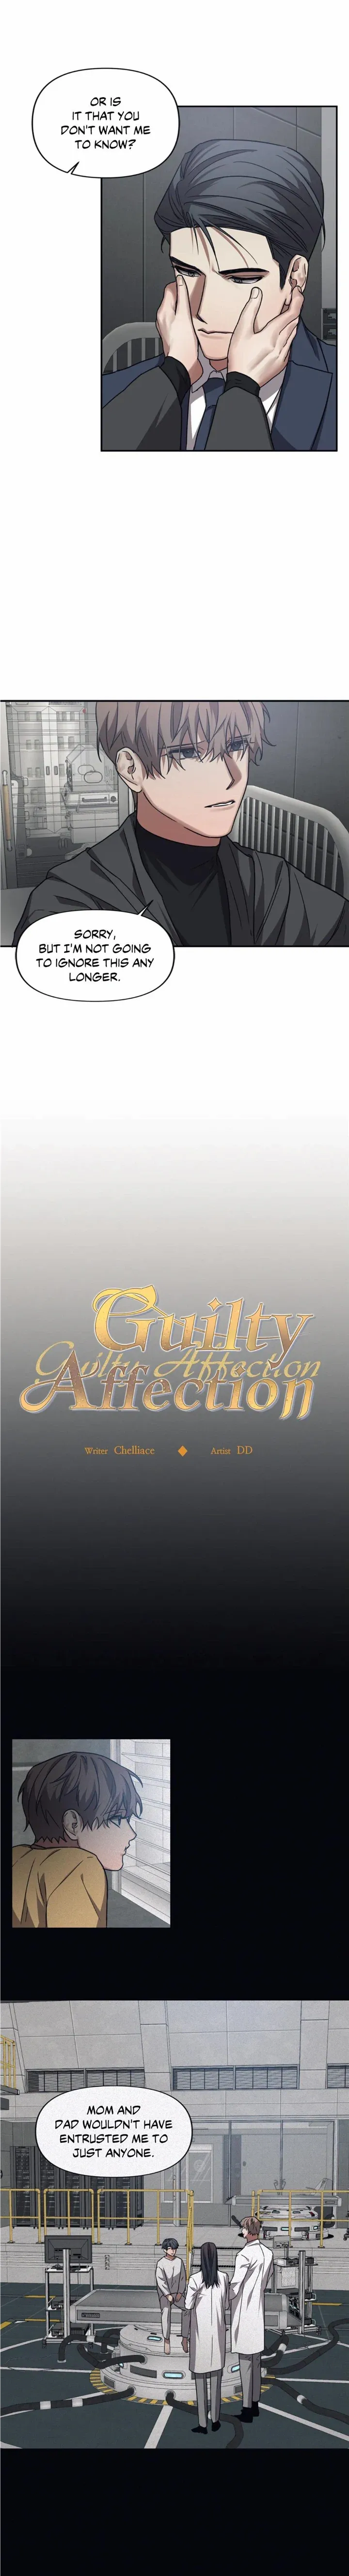 Guilty Affection - Page 2